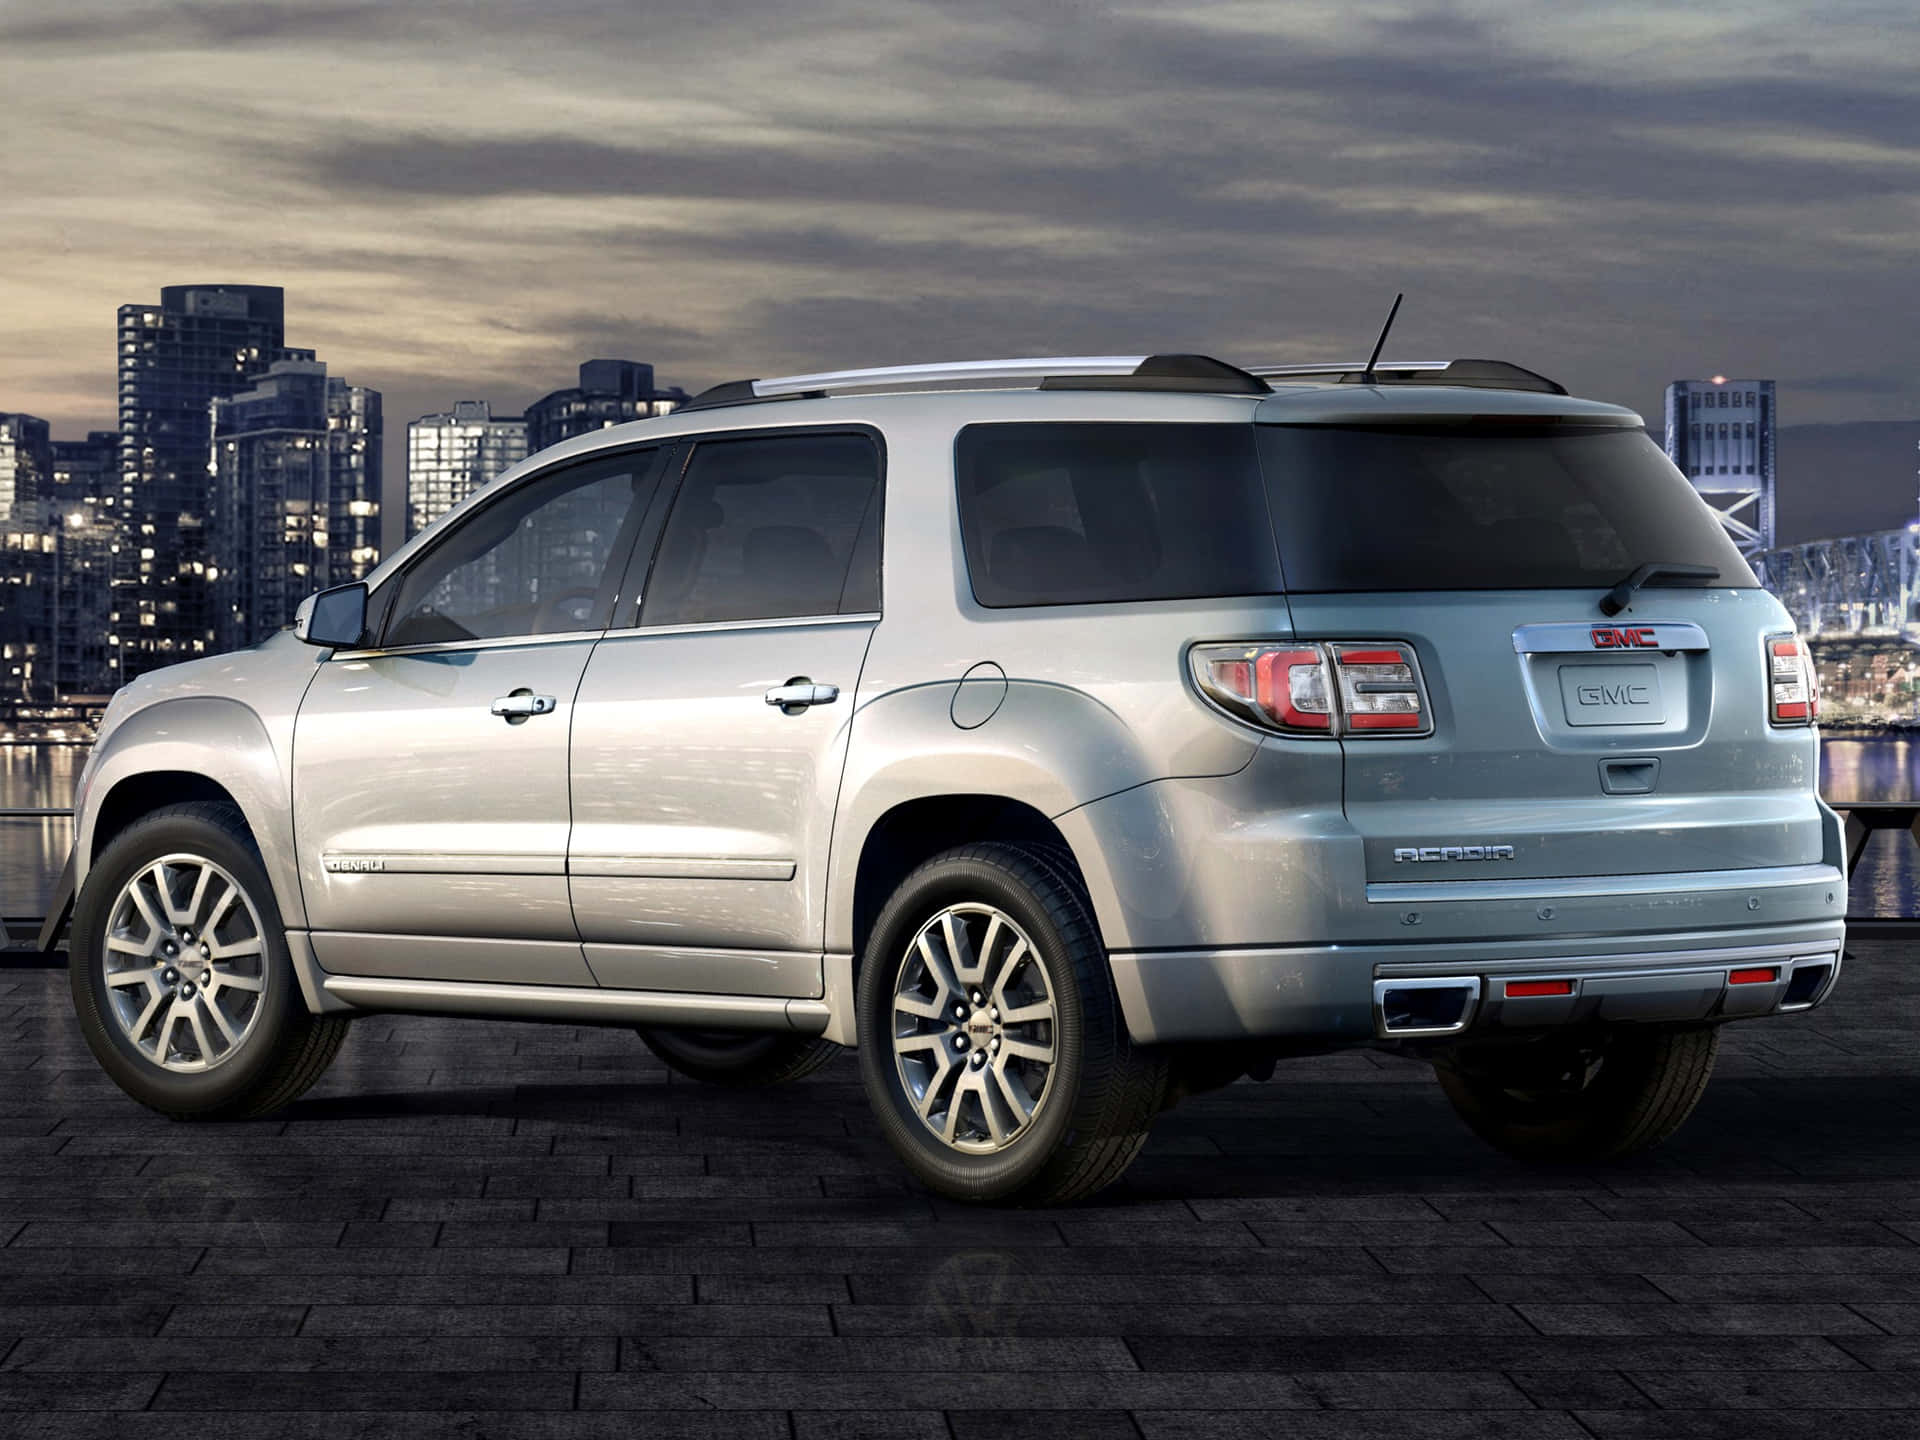 Bold and Luxurious GMC Acadia in Nature Wallpaper